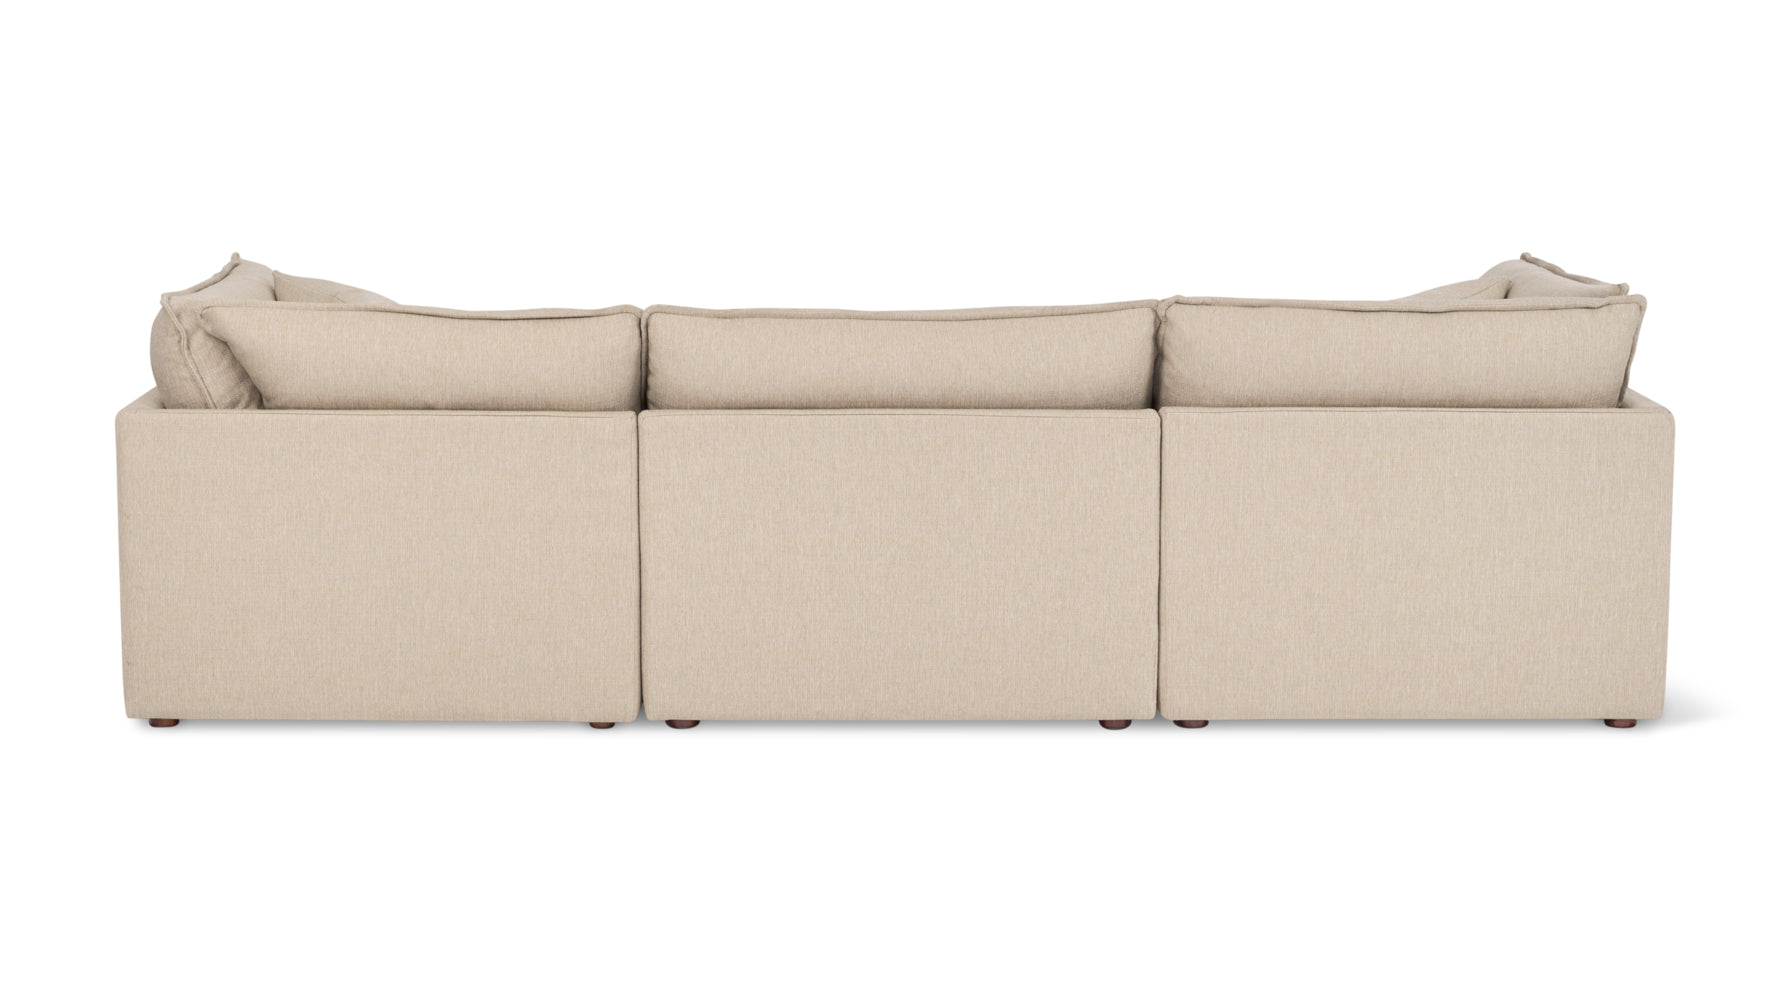 Chill Time 5-Piece Modular U-Shaped Sectional, Biscuit - Image 4